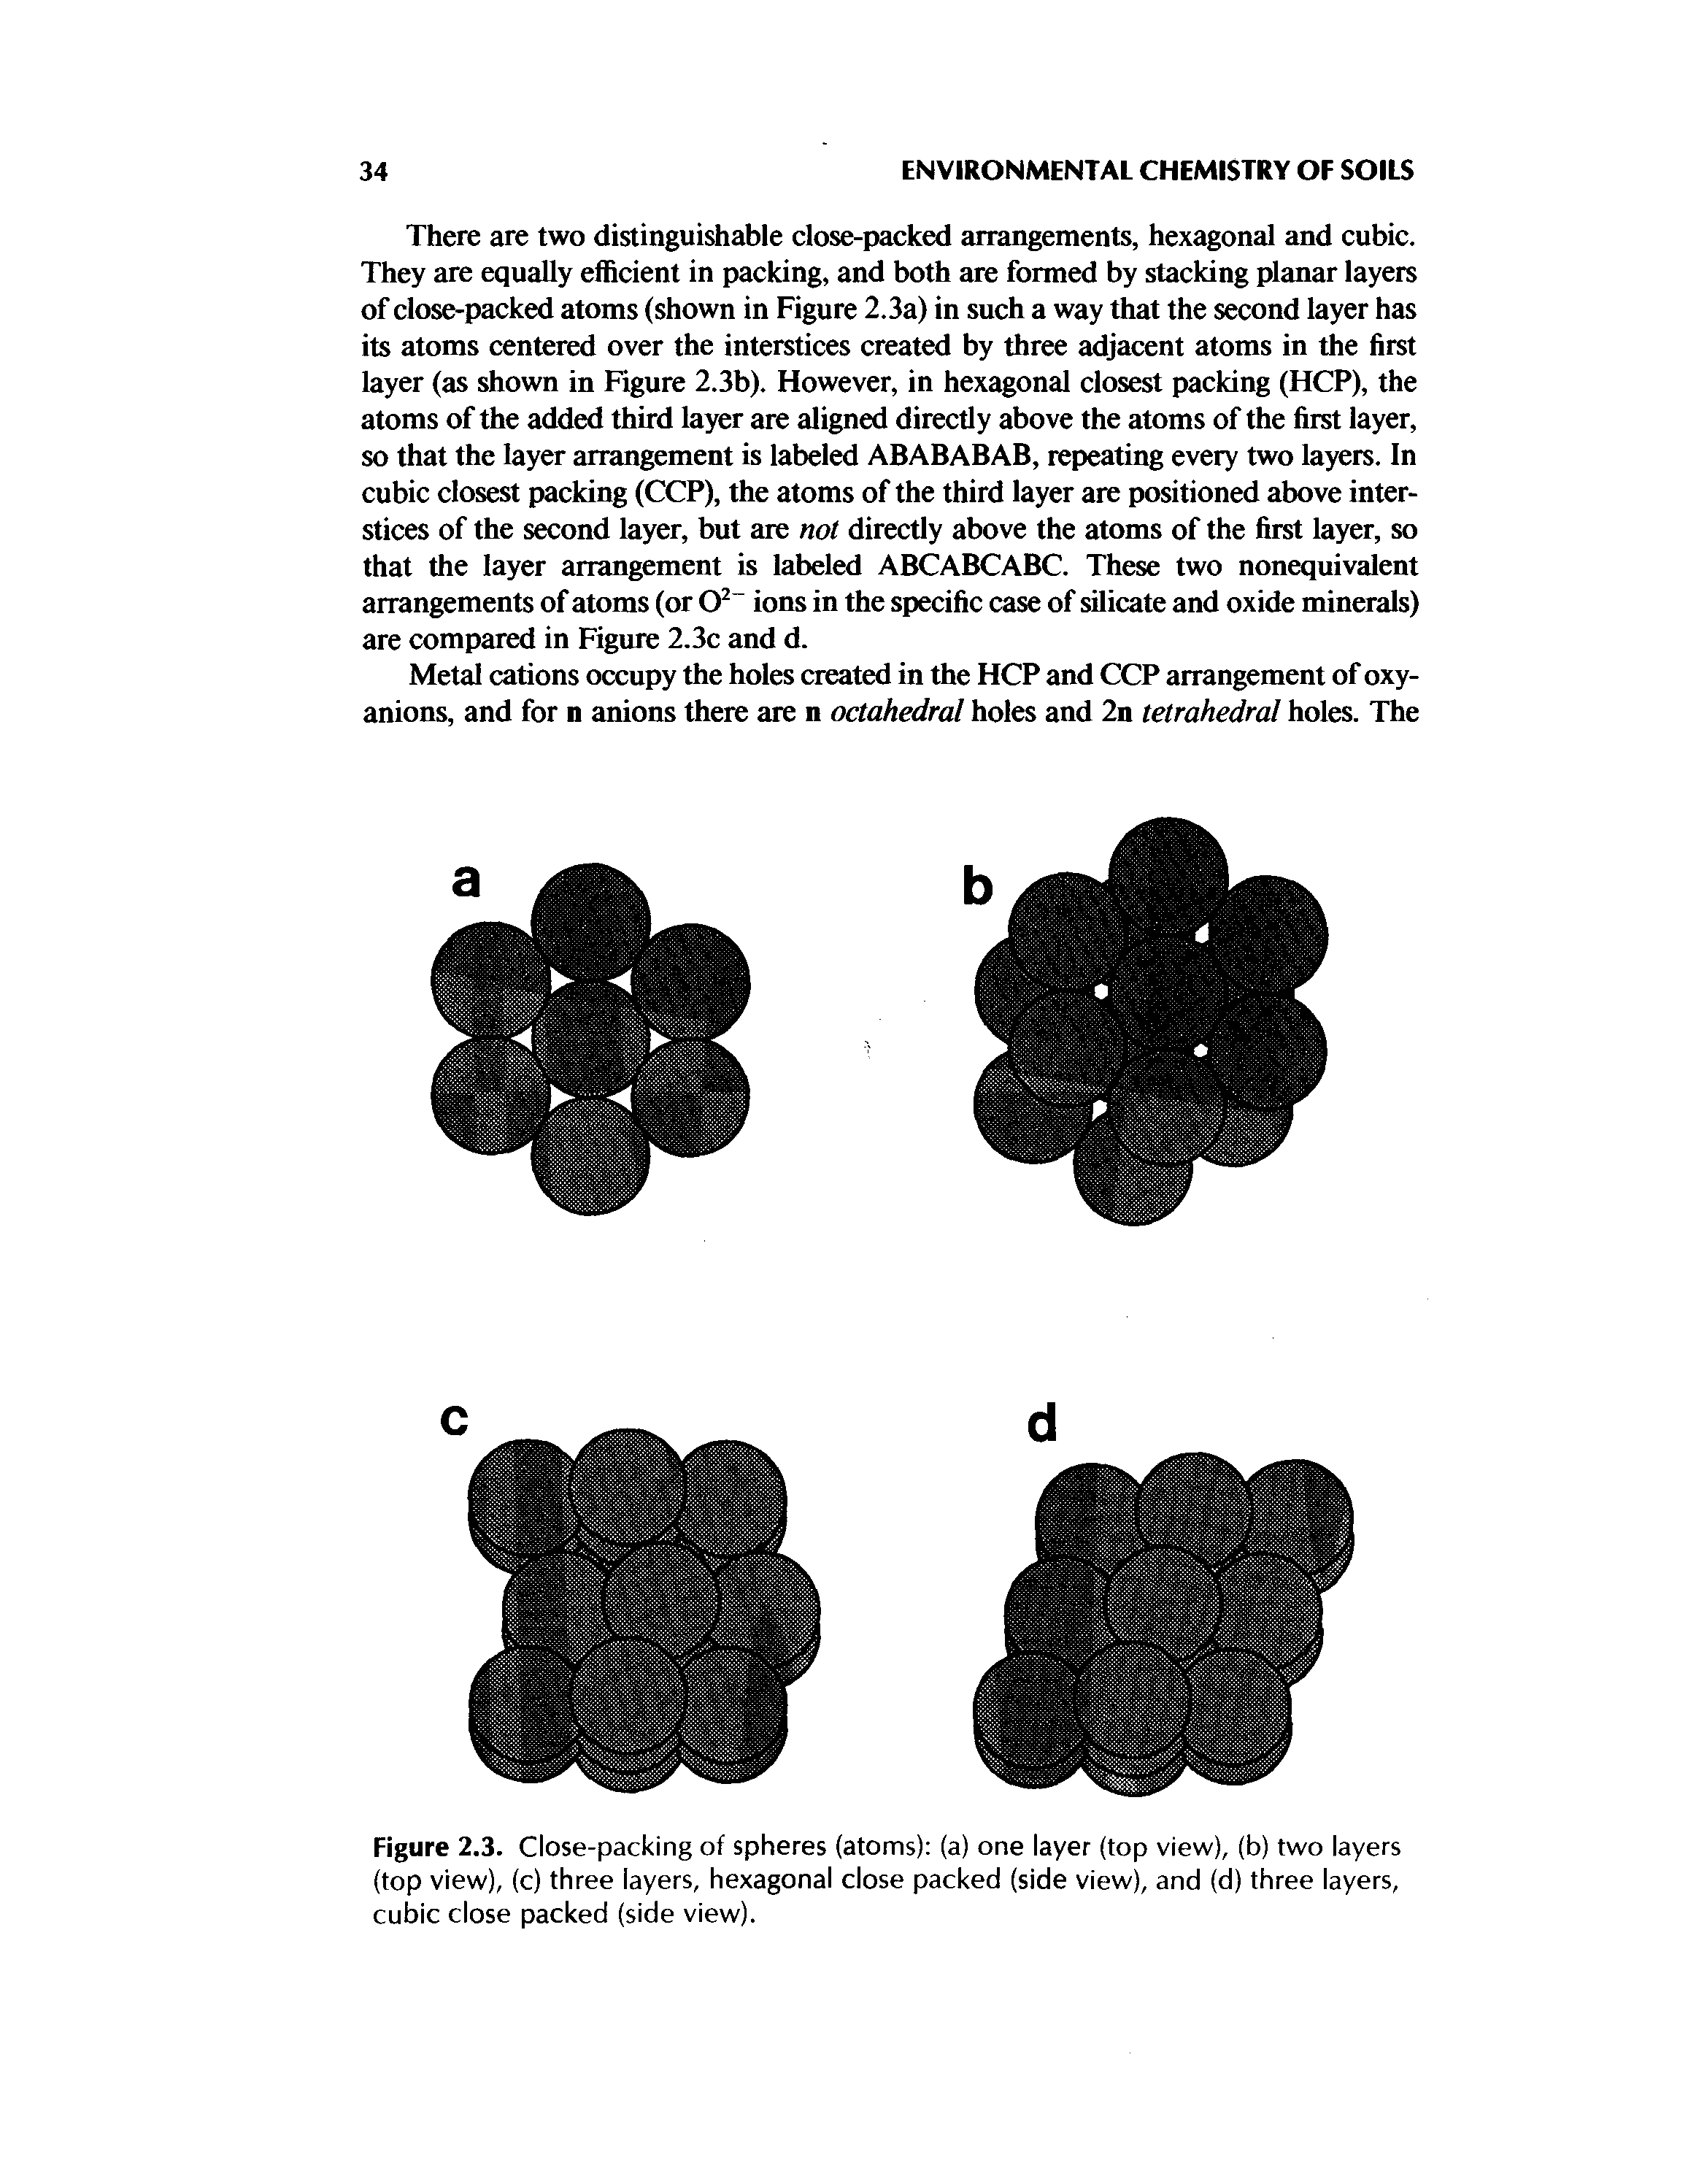 Figure 2.3. Close-packing of spheres (atoms) (a) one layer (top view), (b) two layers (top view), (c) three layers, hexagonal close packed (side view), and (d) three layers, cubic close packed (side view).